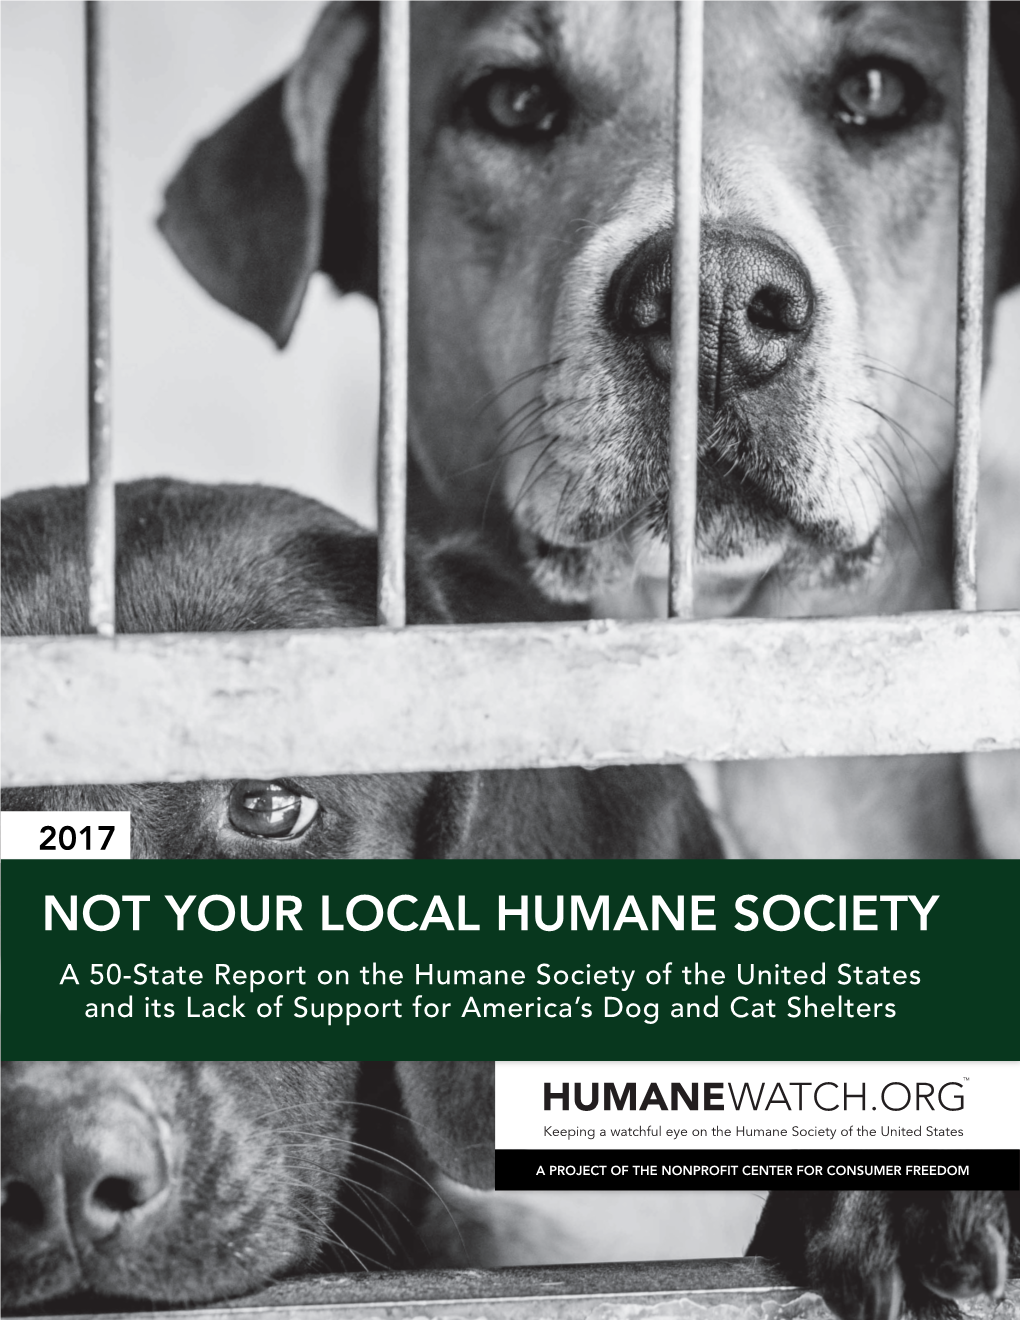 NOT YOUR LOCAL HUMANE SOCIETY a 50-State Report on the Humane Society of the United States and Its Lack of Support for America’S Dog and Cat Shelters